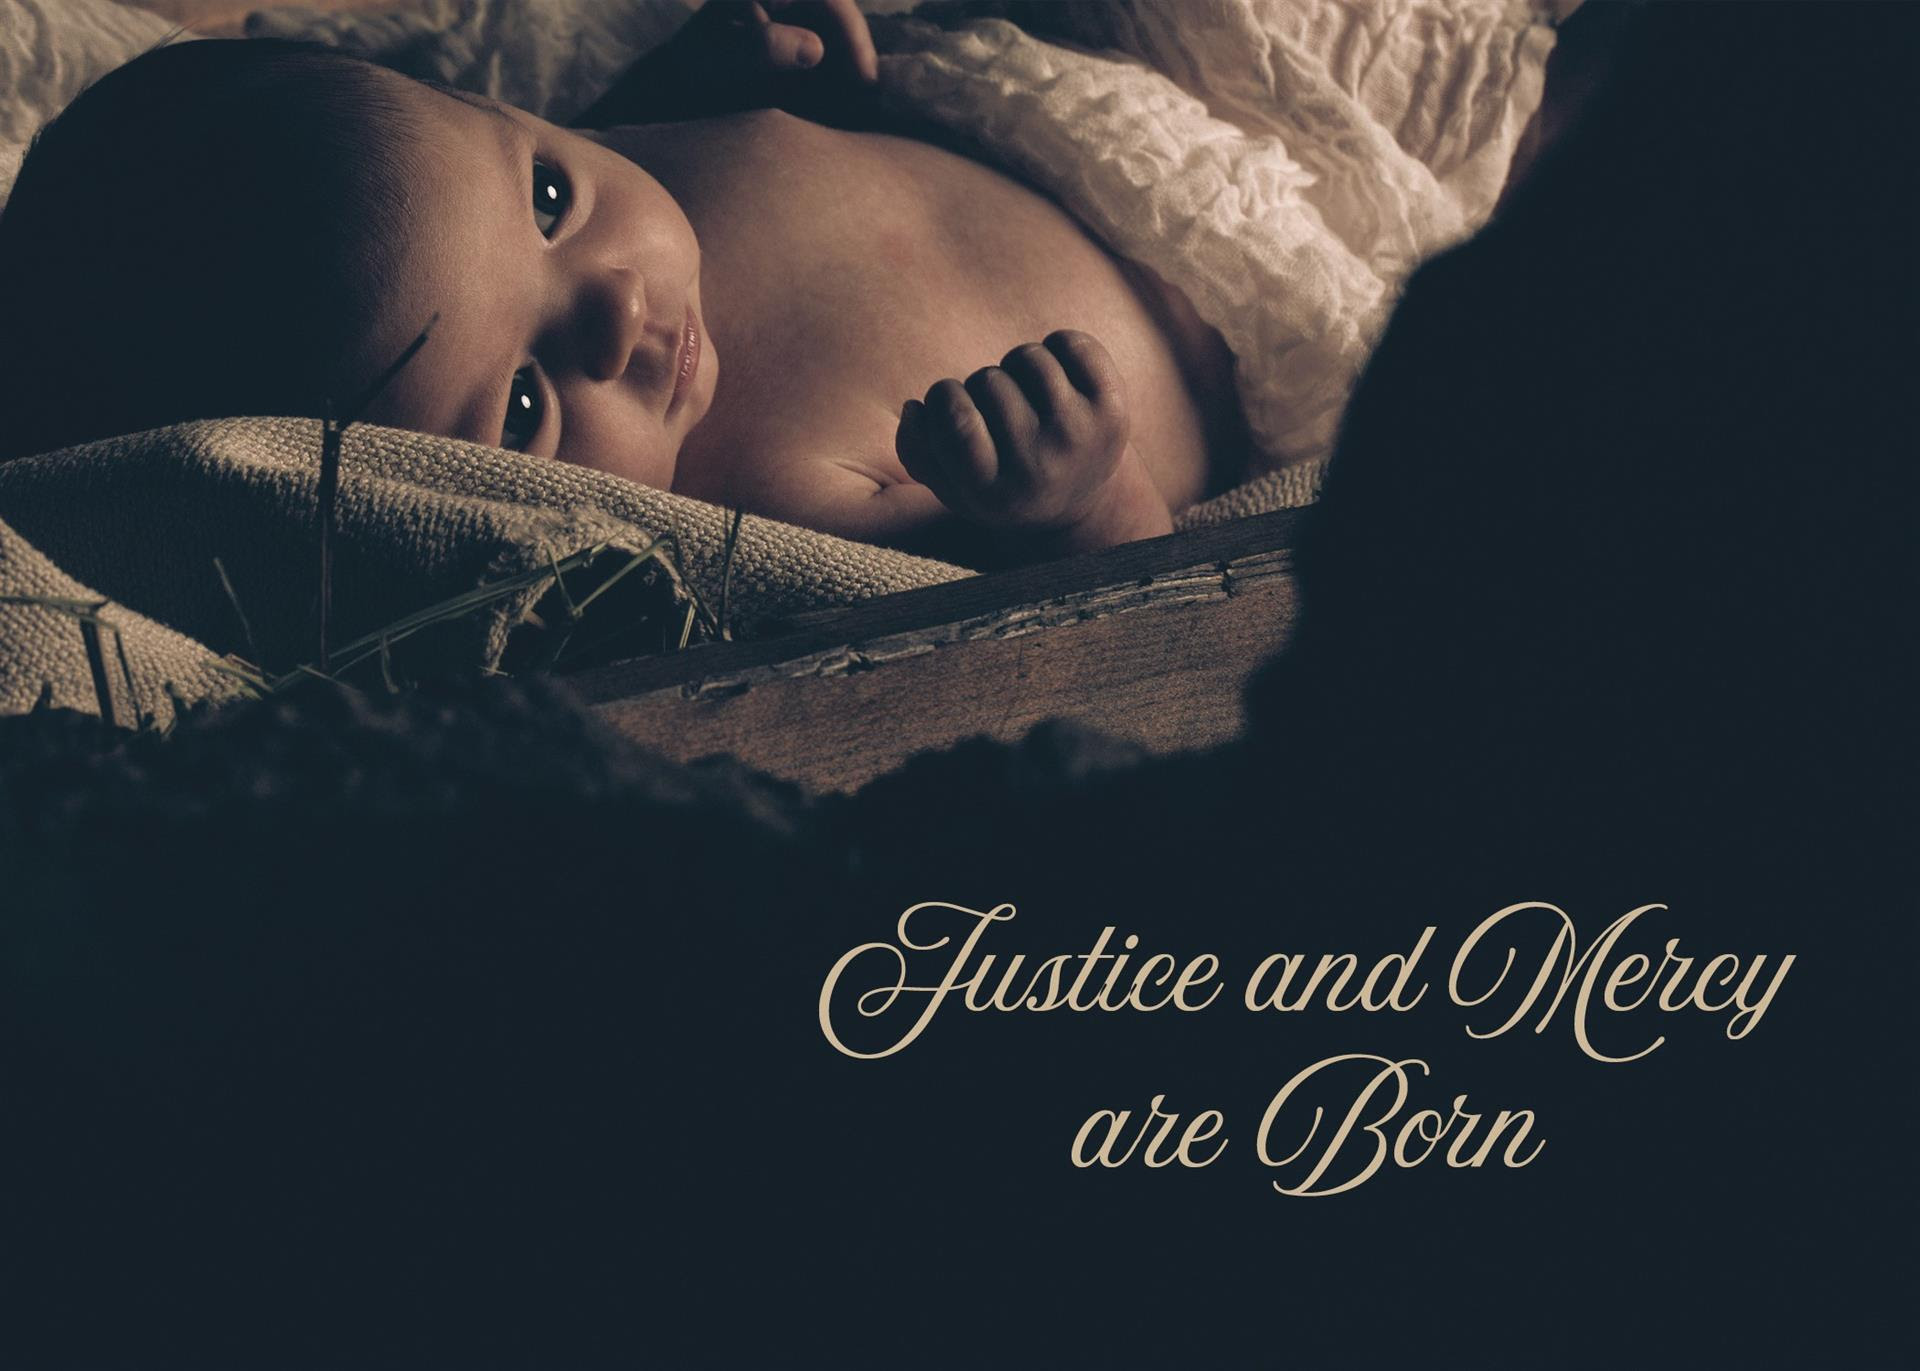 Justice & Mercy are born in the form of a Child on Christmas Day. From our home to yours, Merry Christmas!